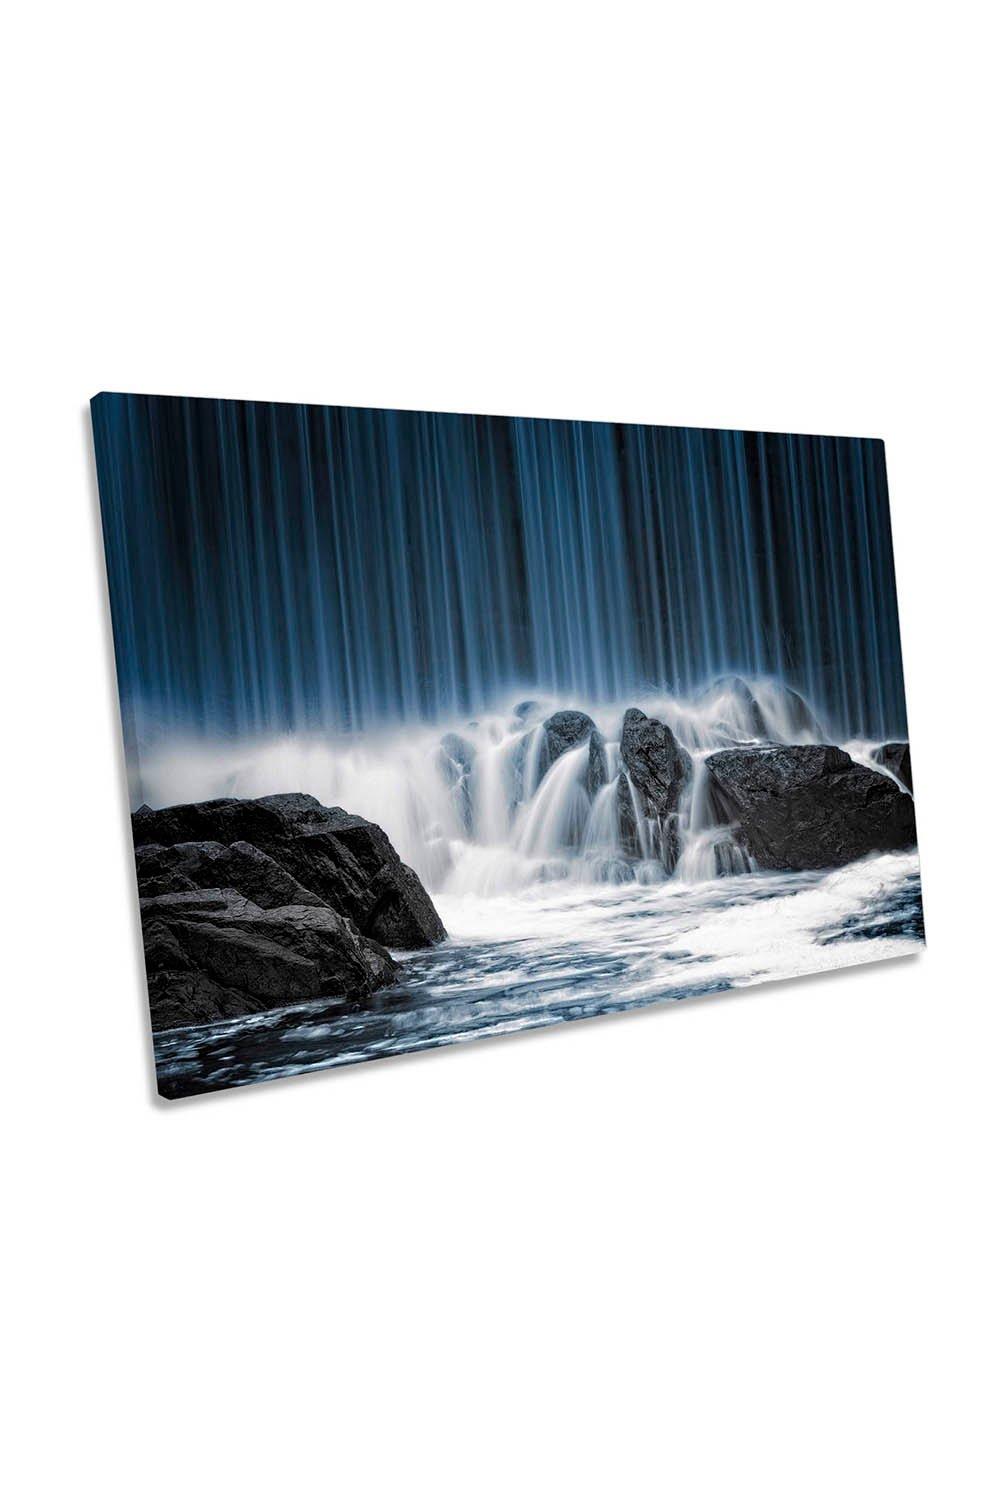 The Blue Curtain Waterfall Nature Canvas Wall Art Picture Print